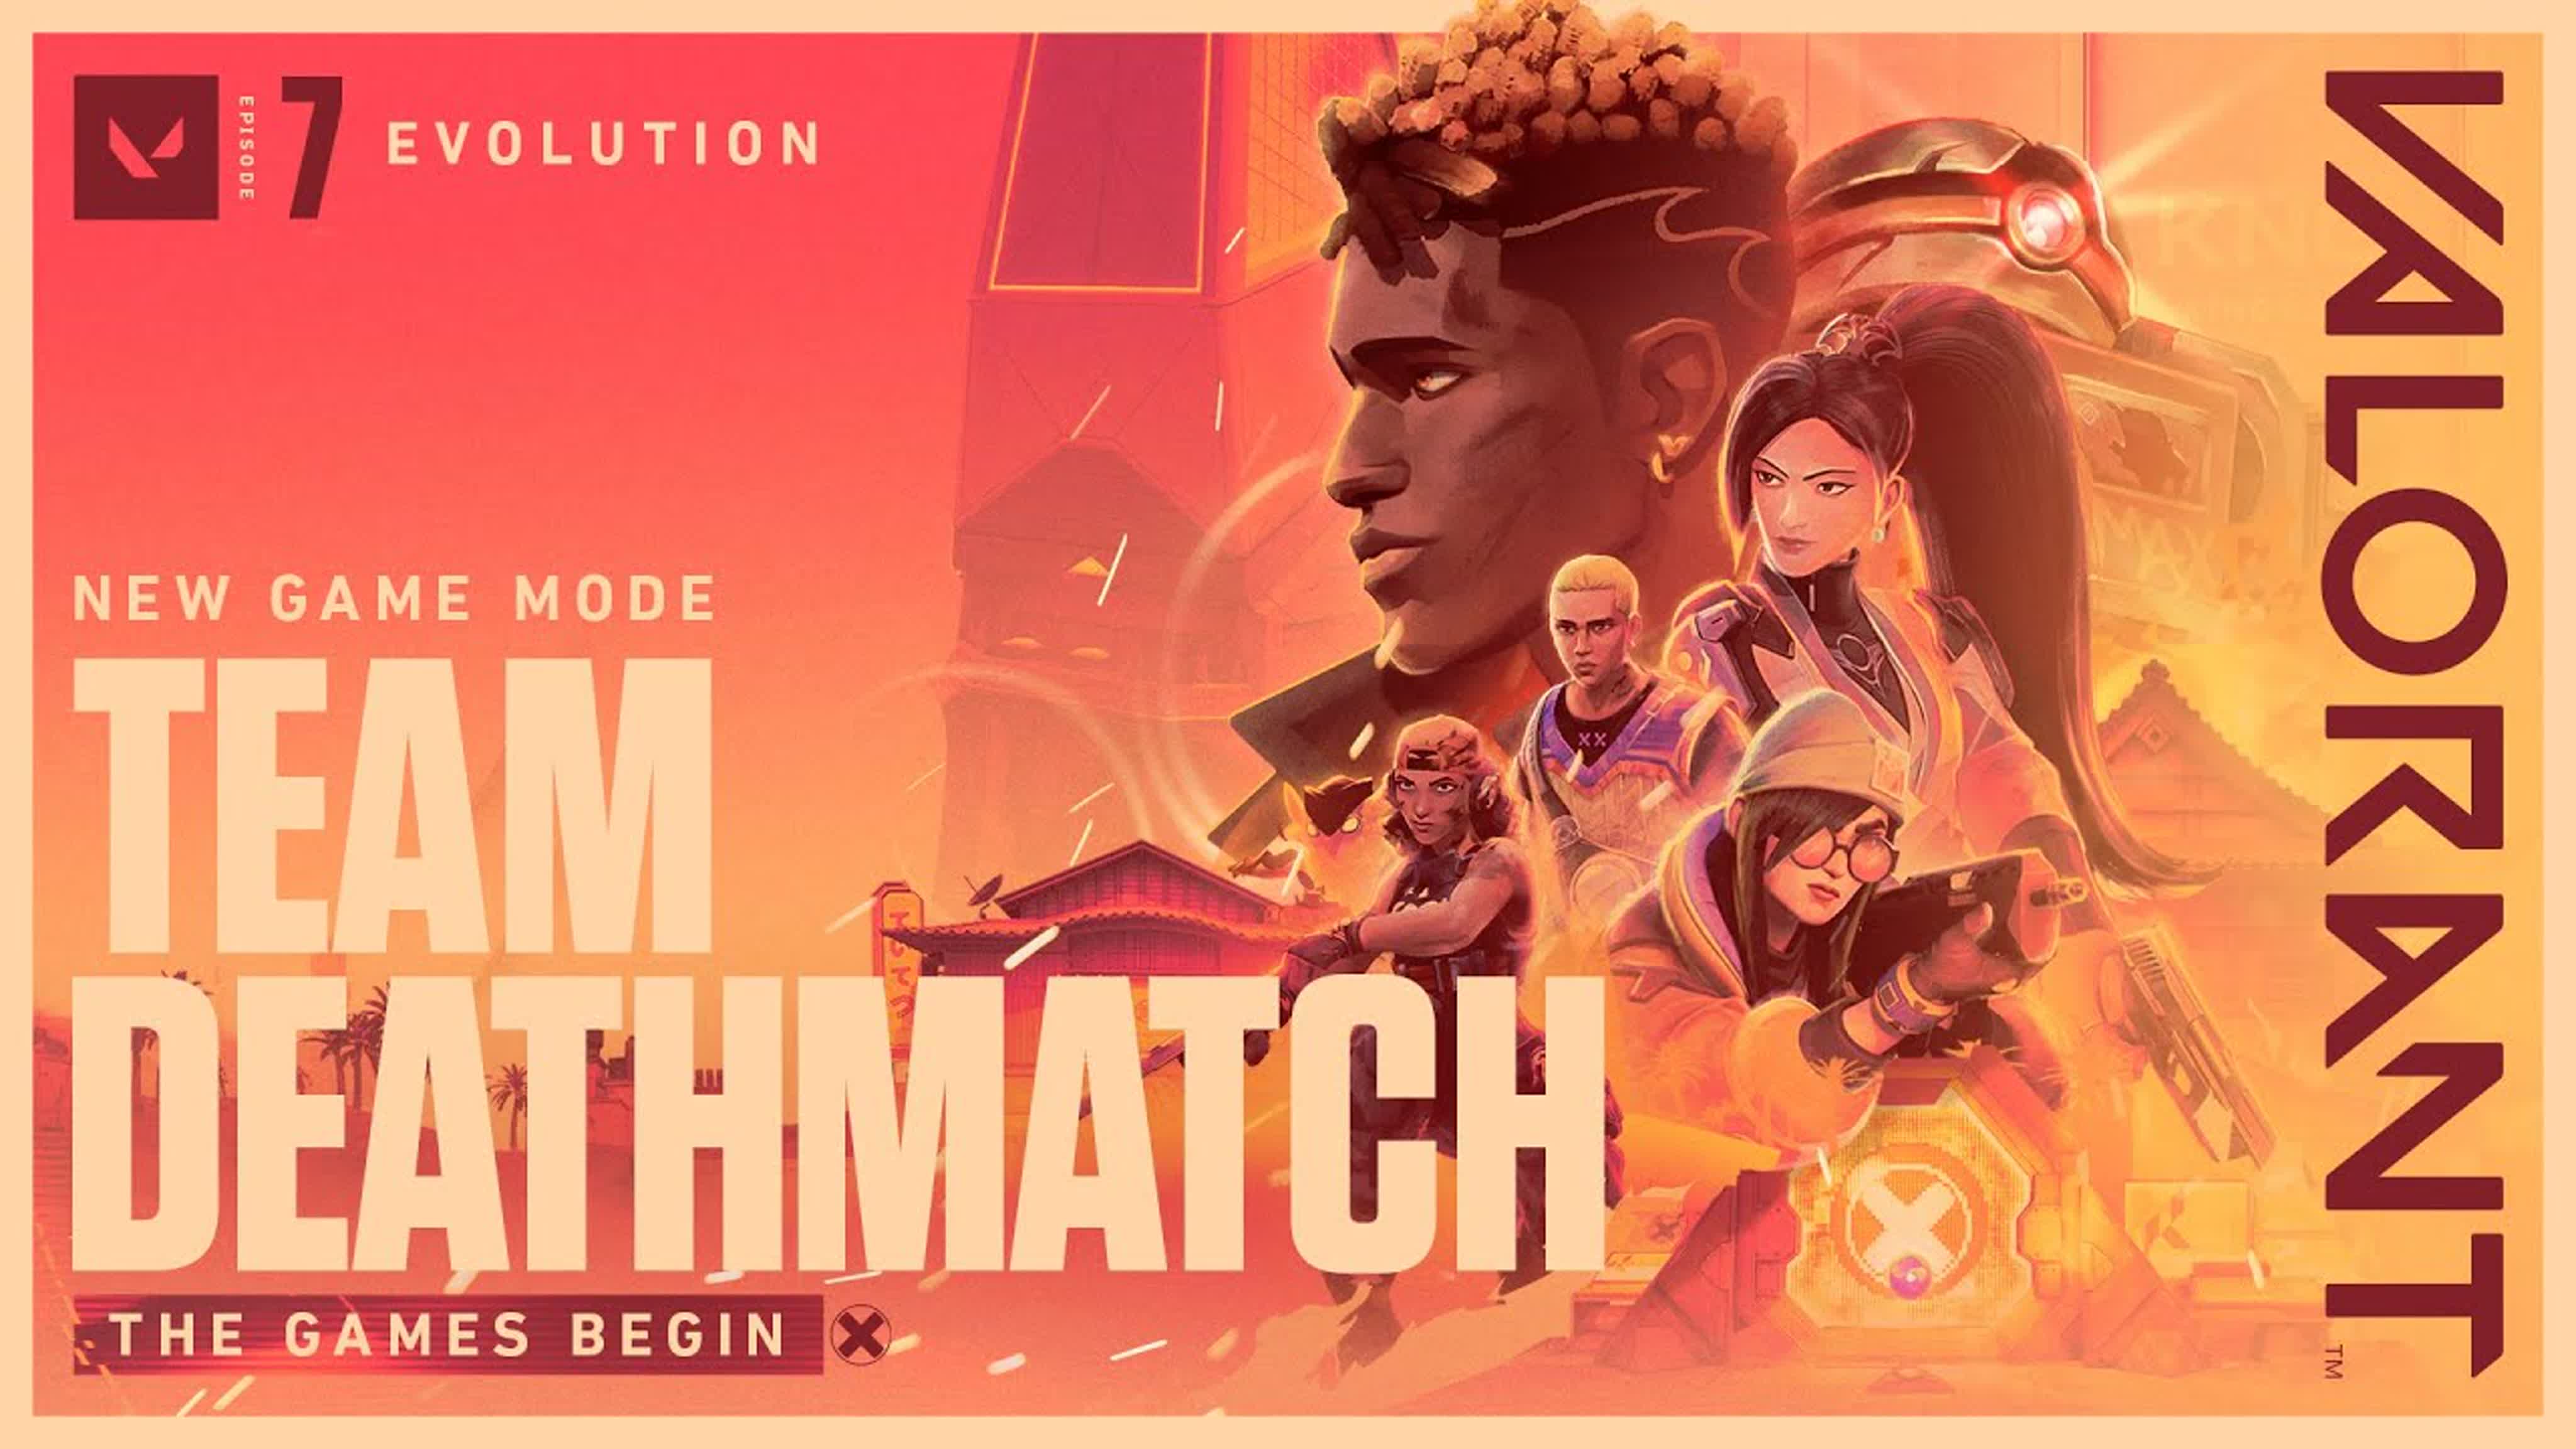 The games begin team deathmatch game mode trailer picture